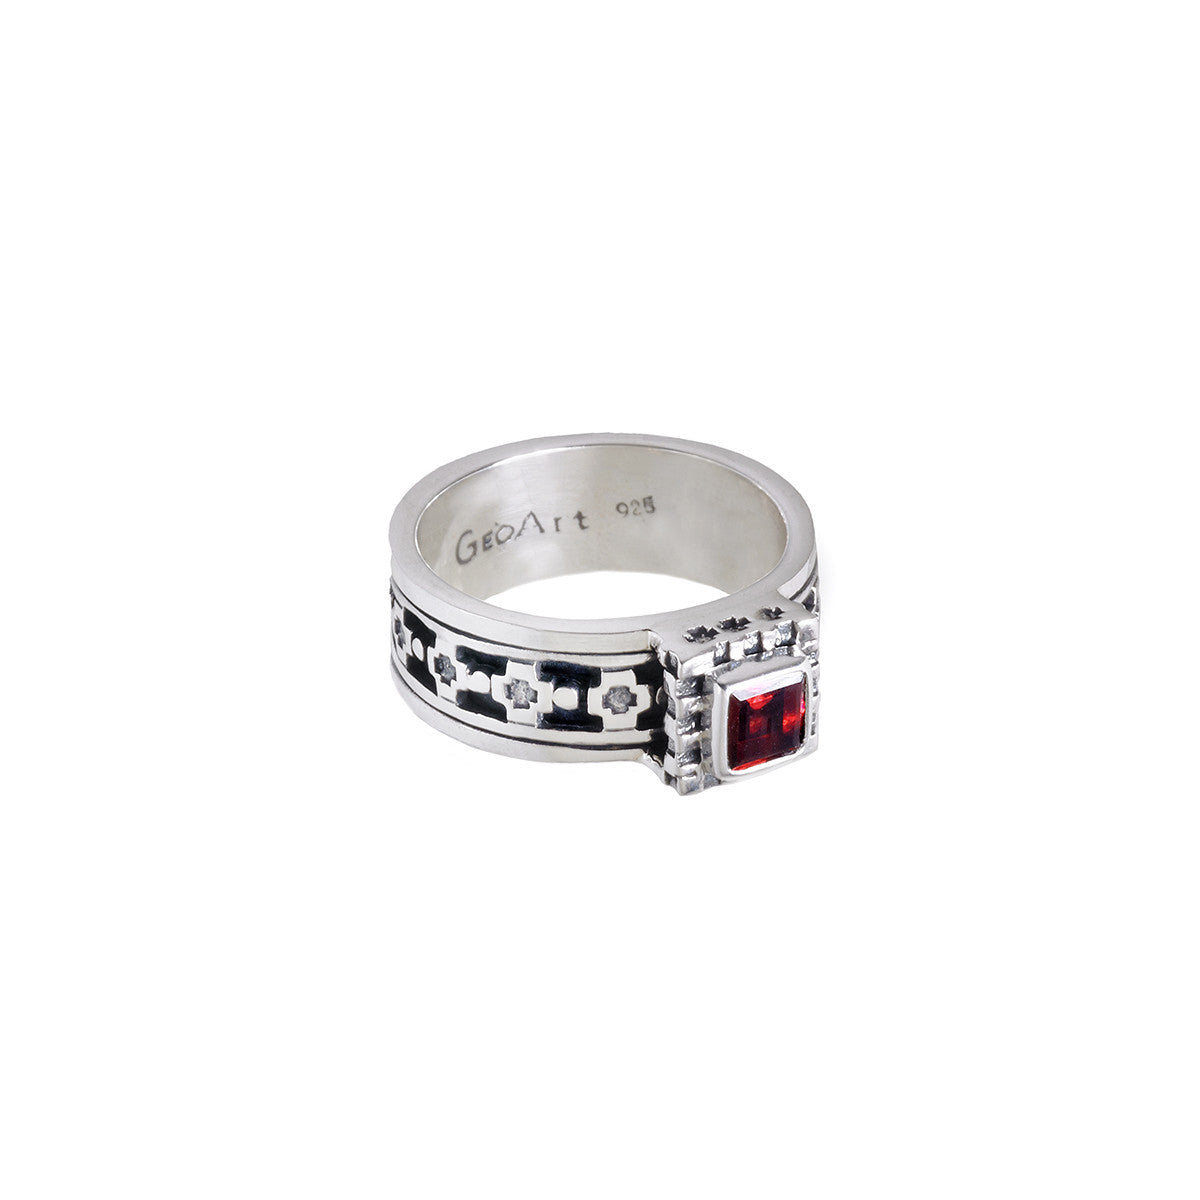 Baroque Sterling Silver And Garnet Spin Ring - Cynthia Gale New York - 2